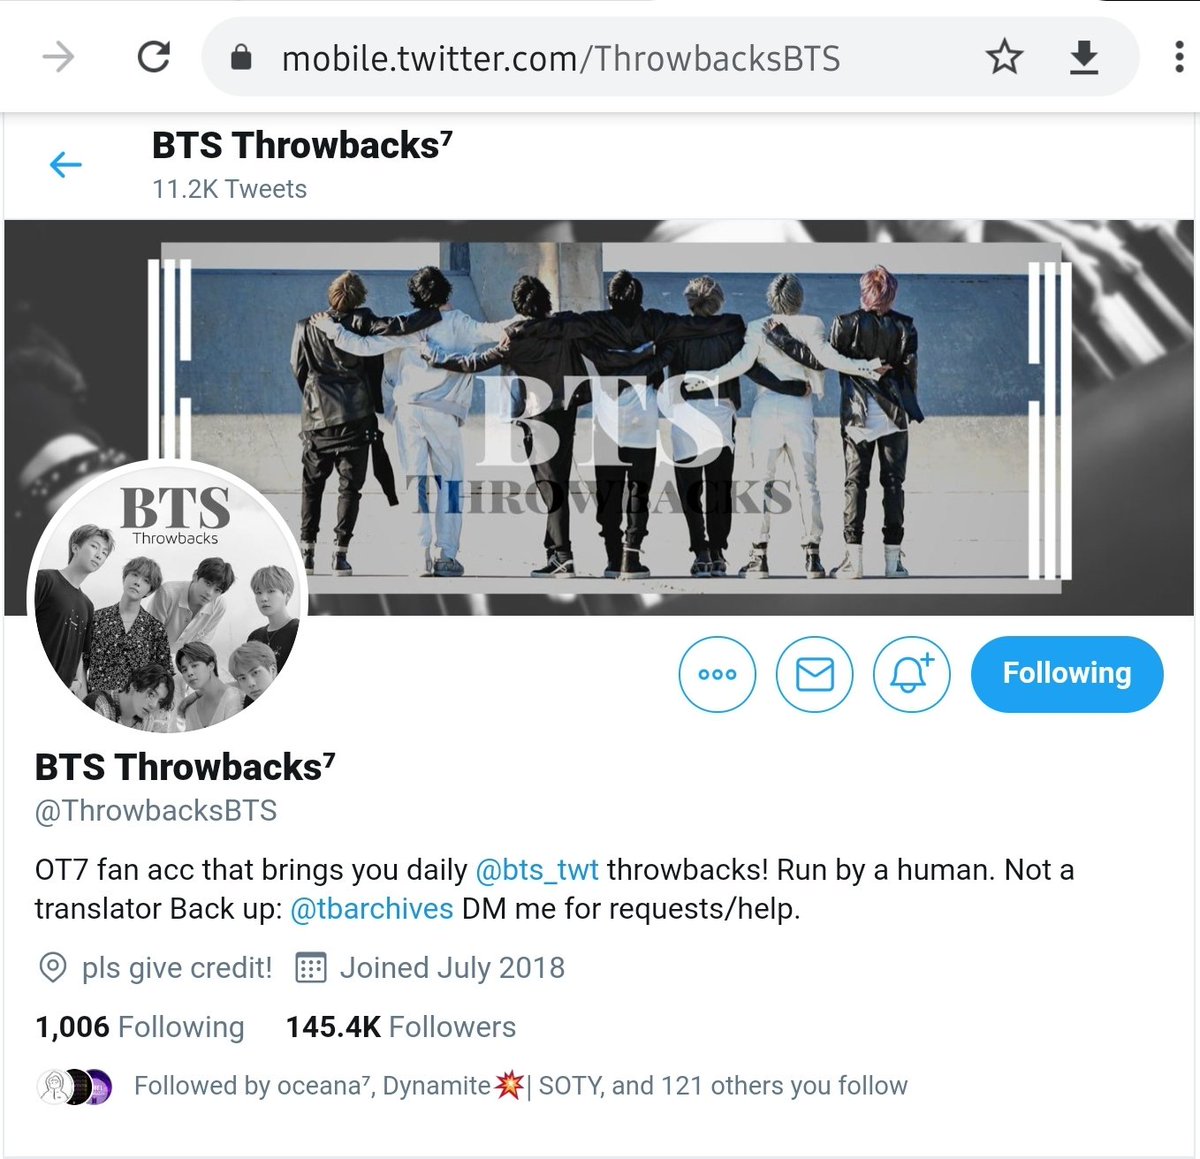 Interested in  #BTS History or walking down the memory lane? -  @ThrowbacksBTS  @BTS_History613Hey, do you know which brand that member was wearing? How much is it? Fashion connoisseur? -  @Bangtan_Style07 Interested in mysticism? -  @btstrology_  #BTSARMY  @BTS_twt